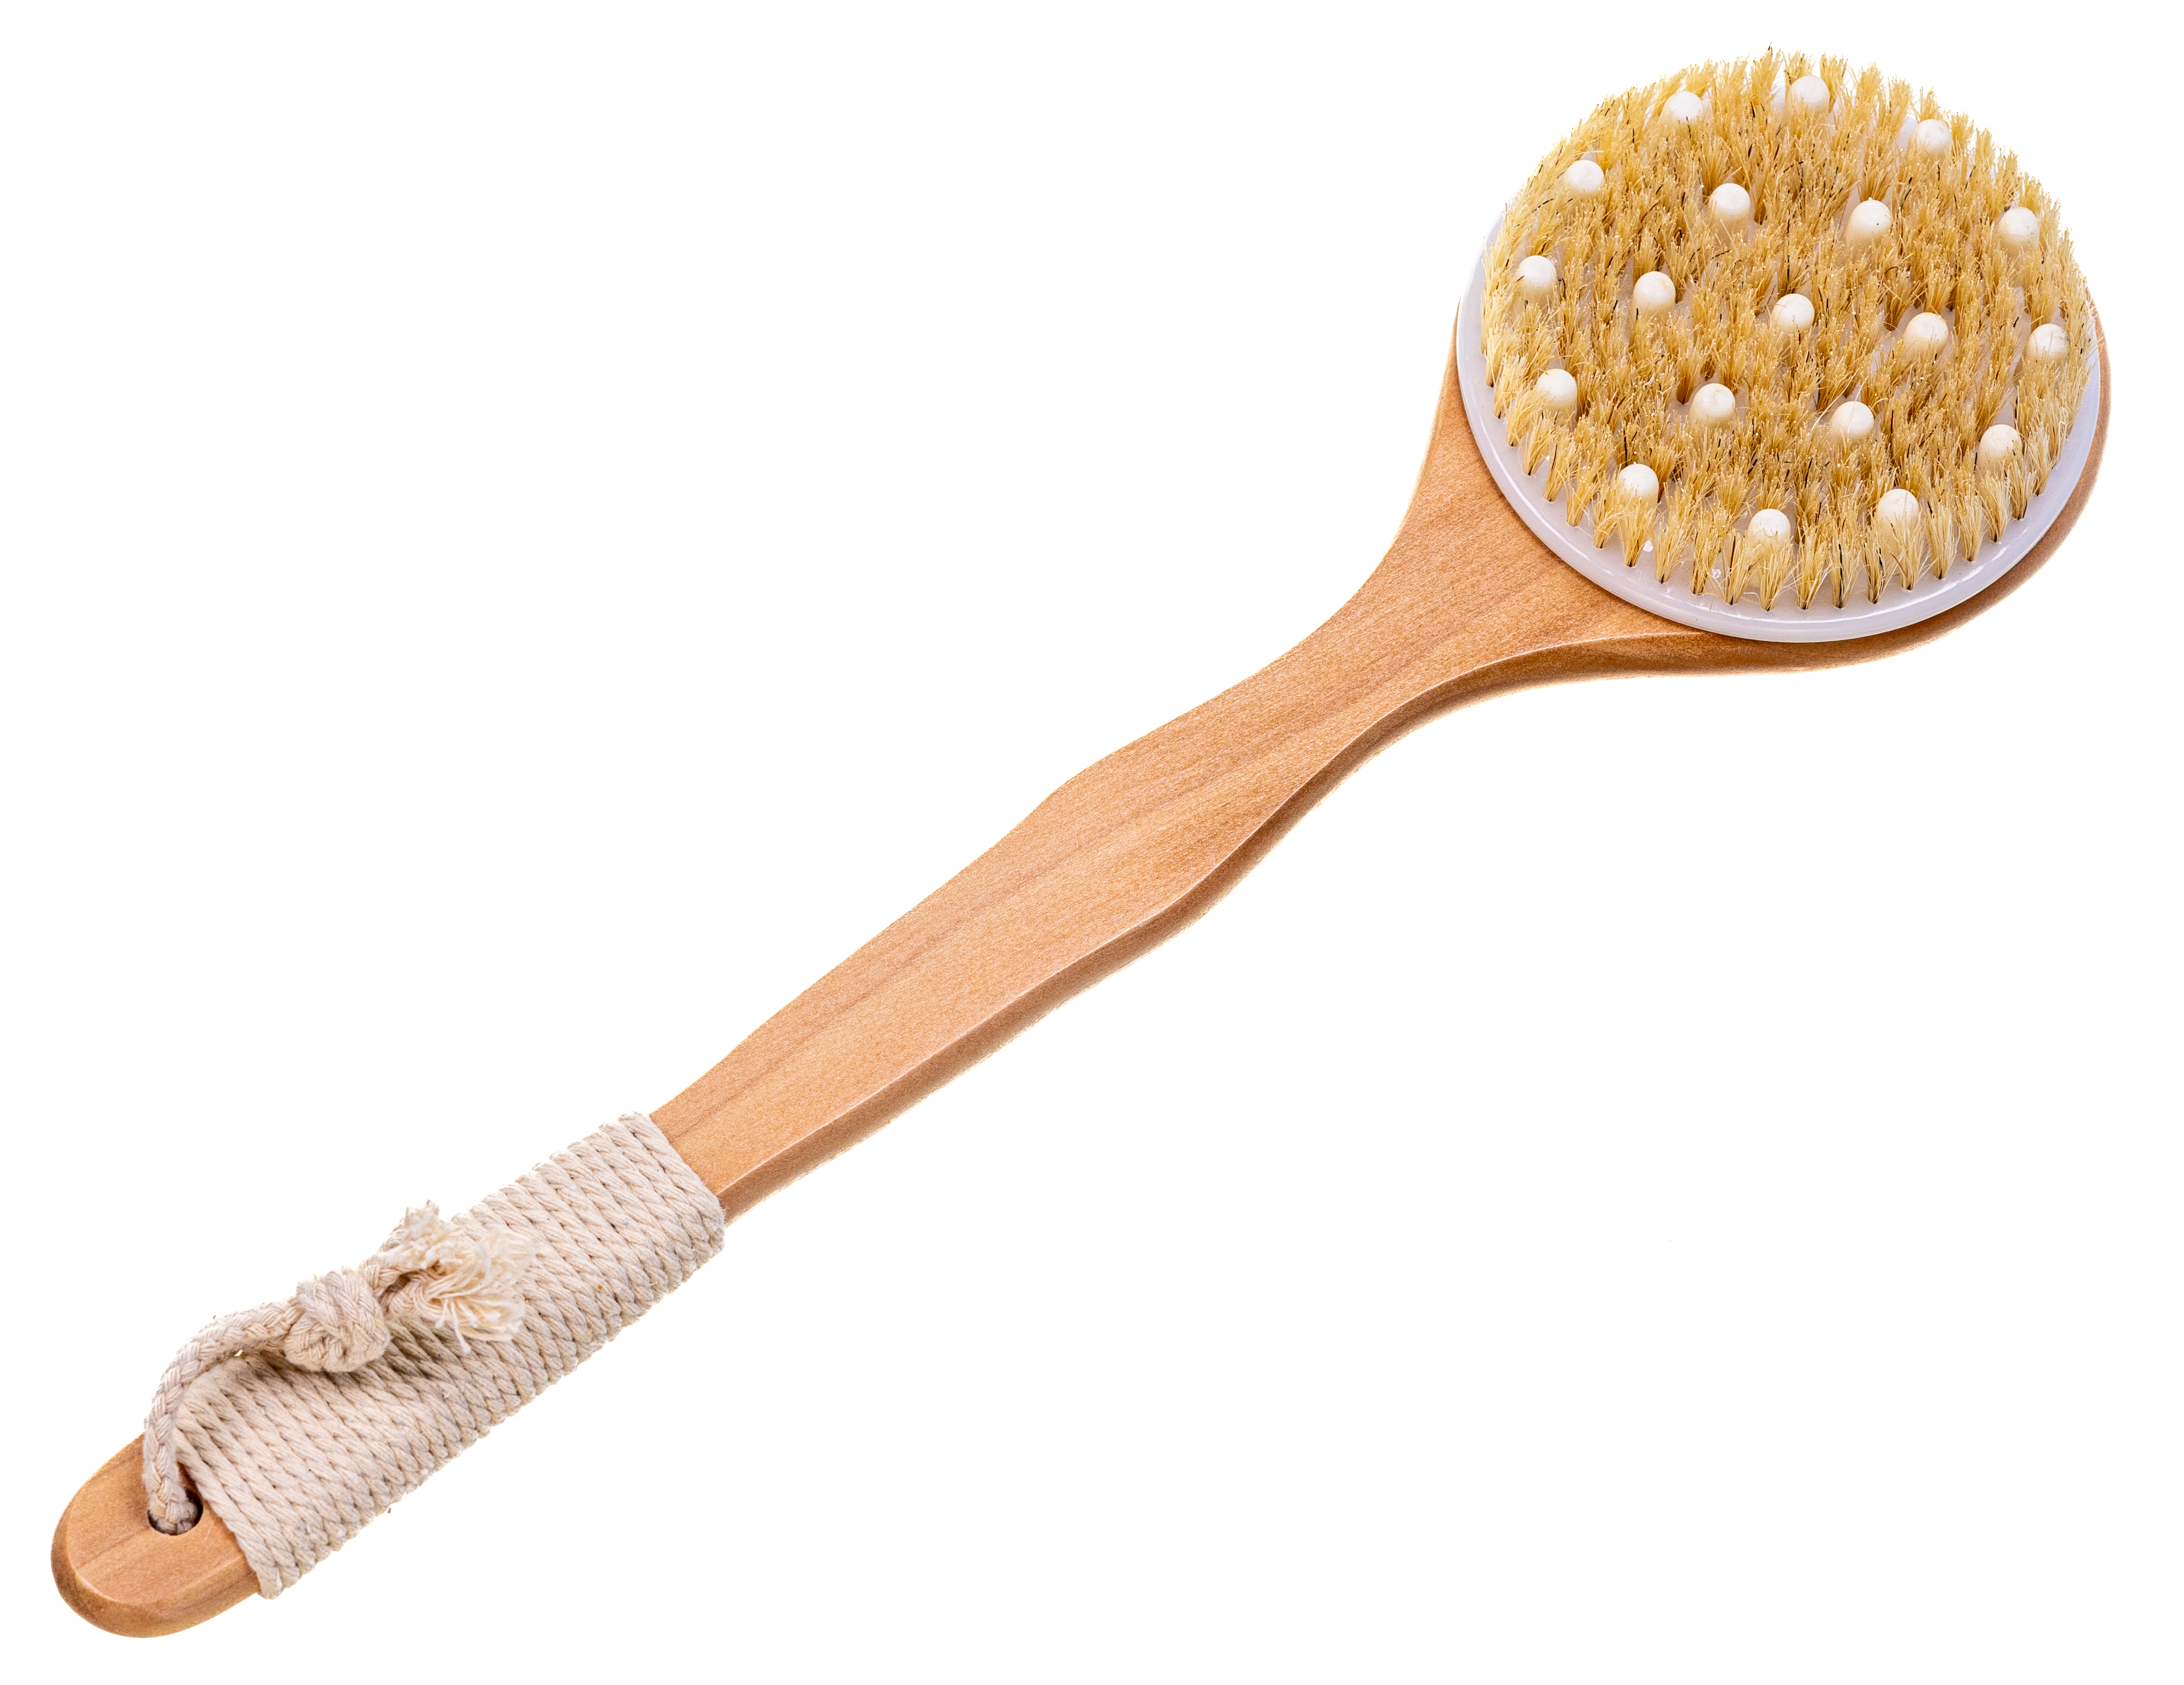 https://www.naturalbathbody.com/images/product/round-bath-brush-with-massager-nubs.jpg